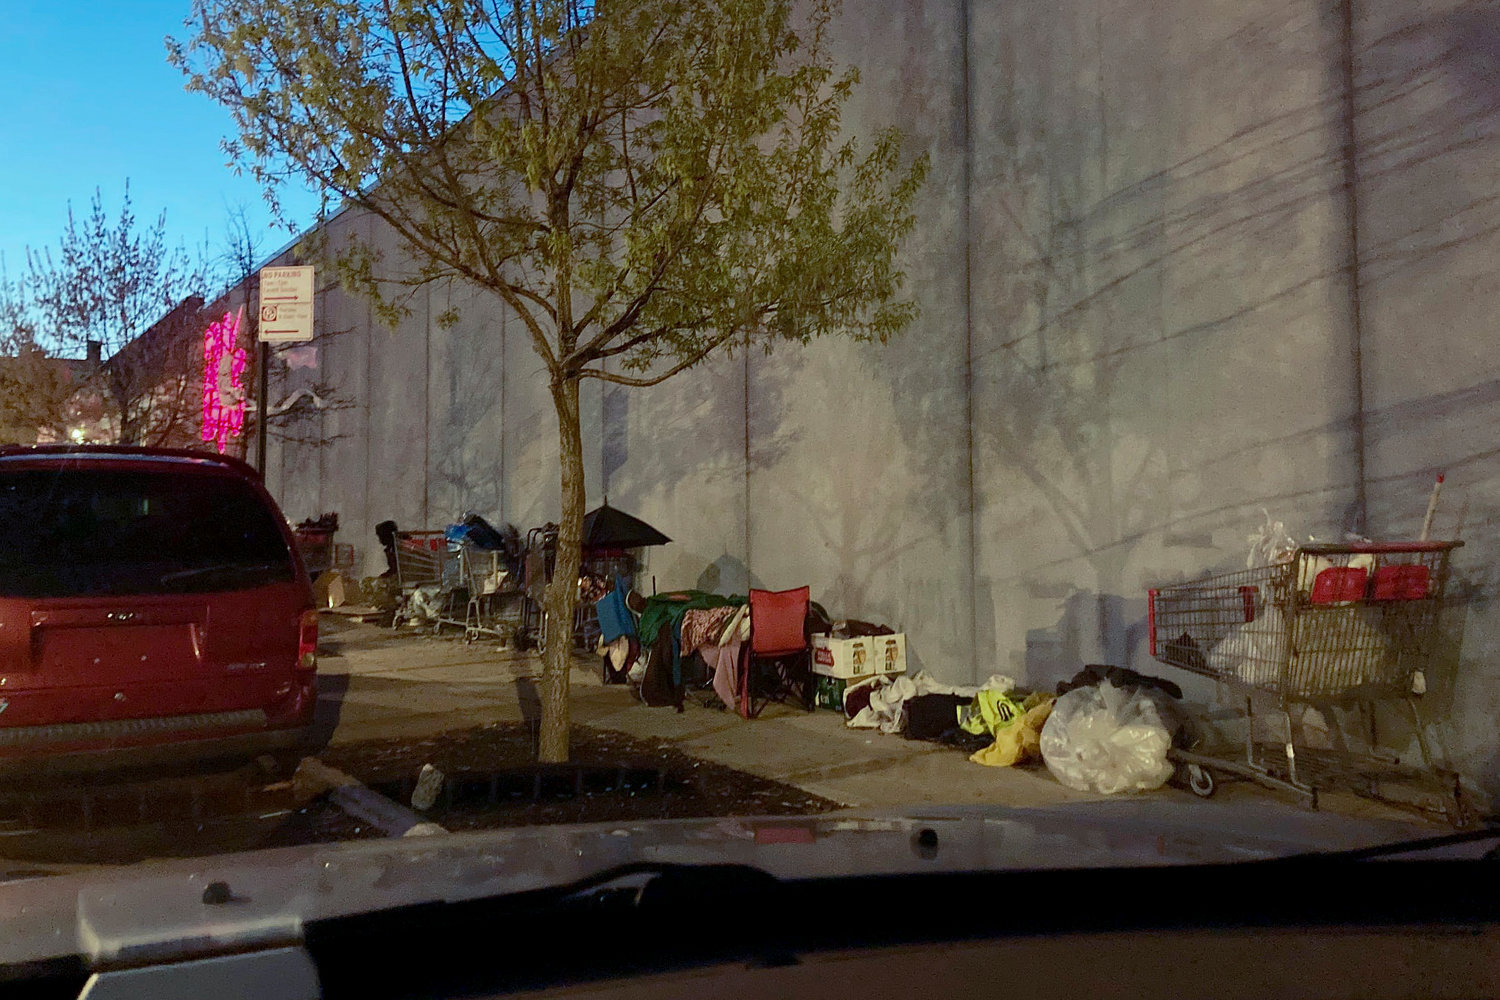 City officials cleaned the site of a homeless encampment last week near the intersection of West 236th and Broadway, a stone's throw away from NYPD’s 50th Precinct in Kingsbridge.